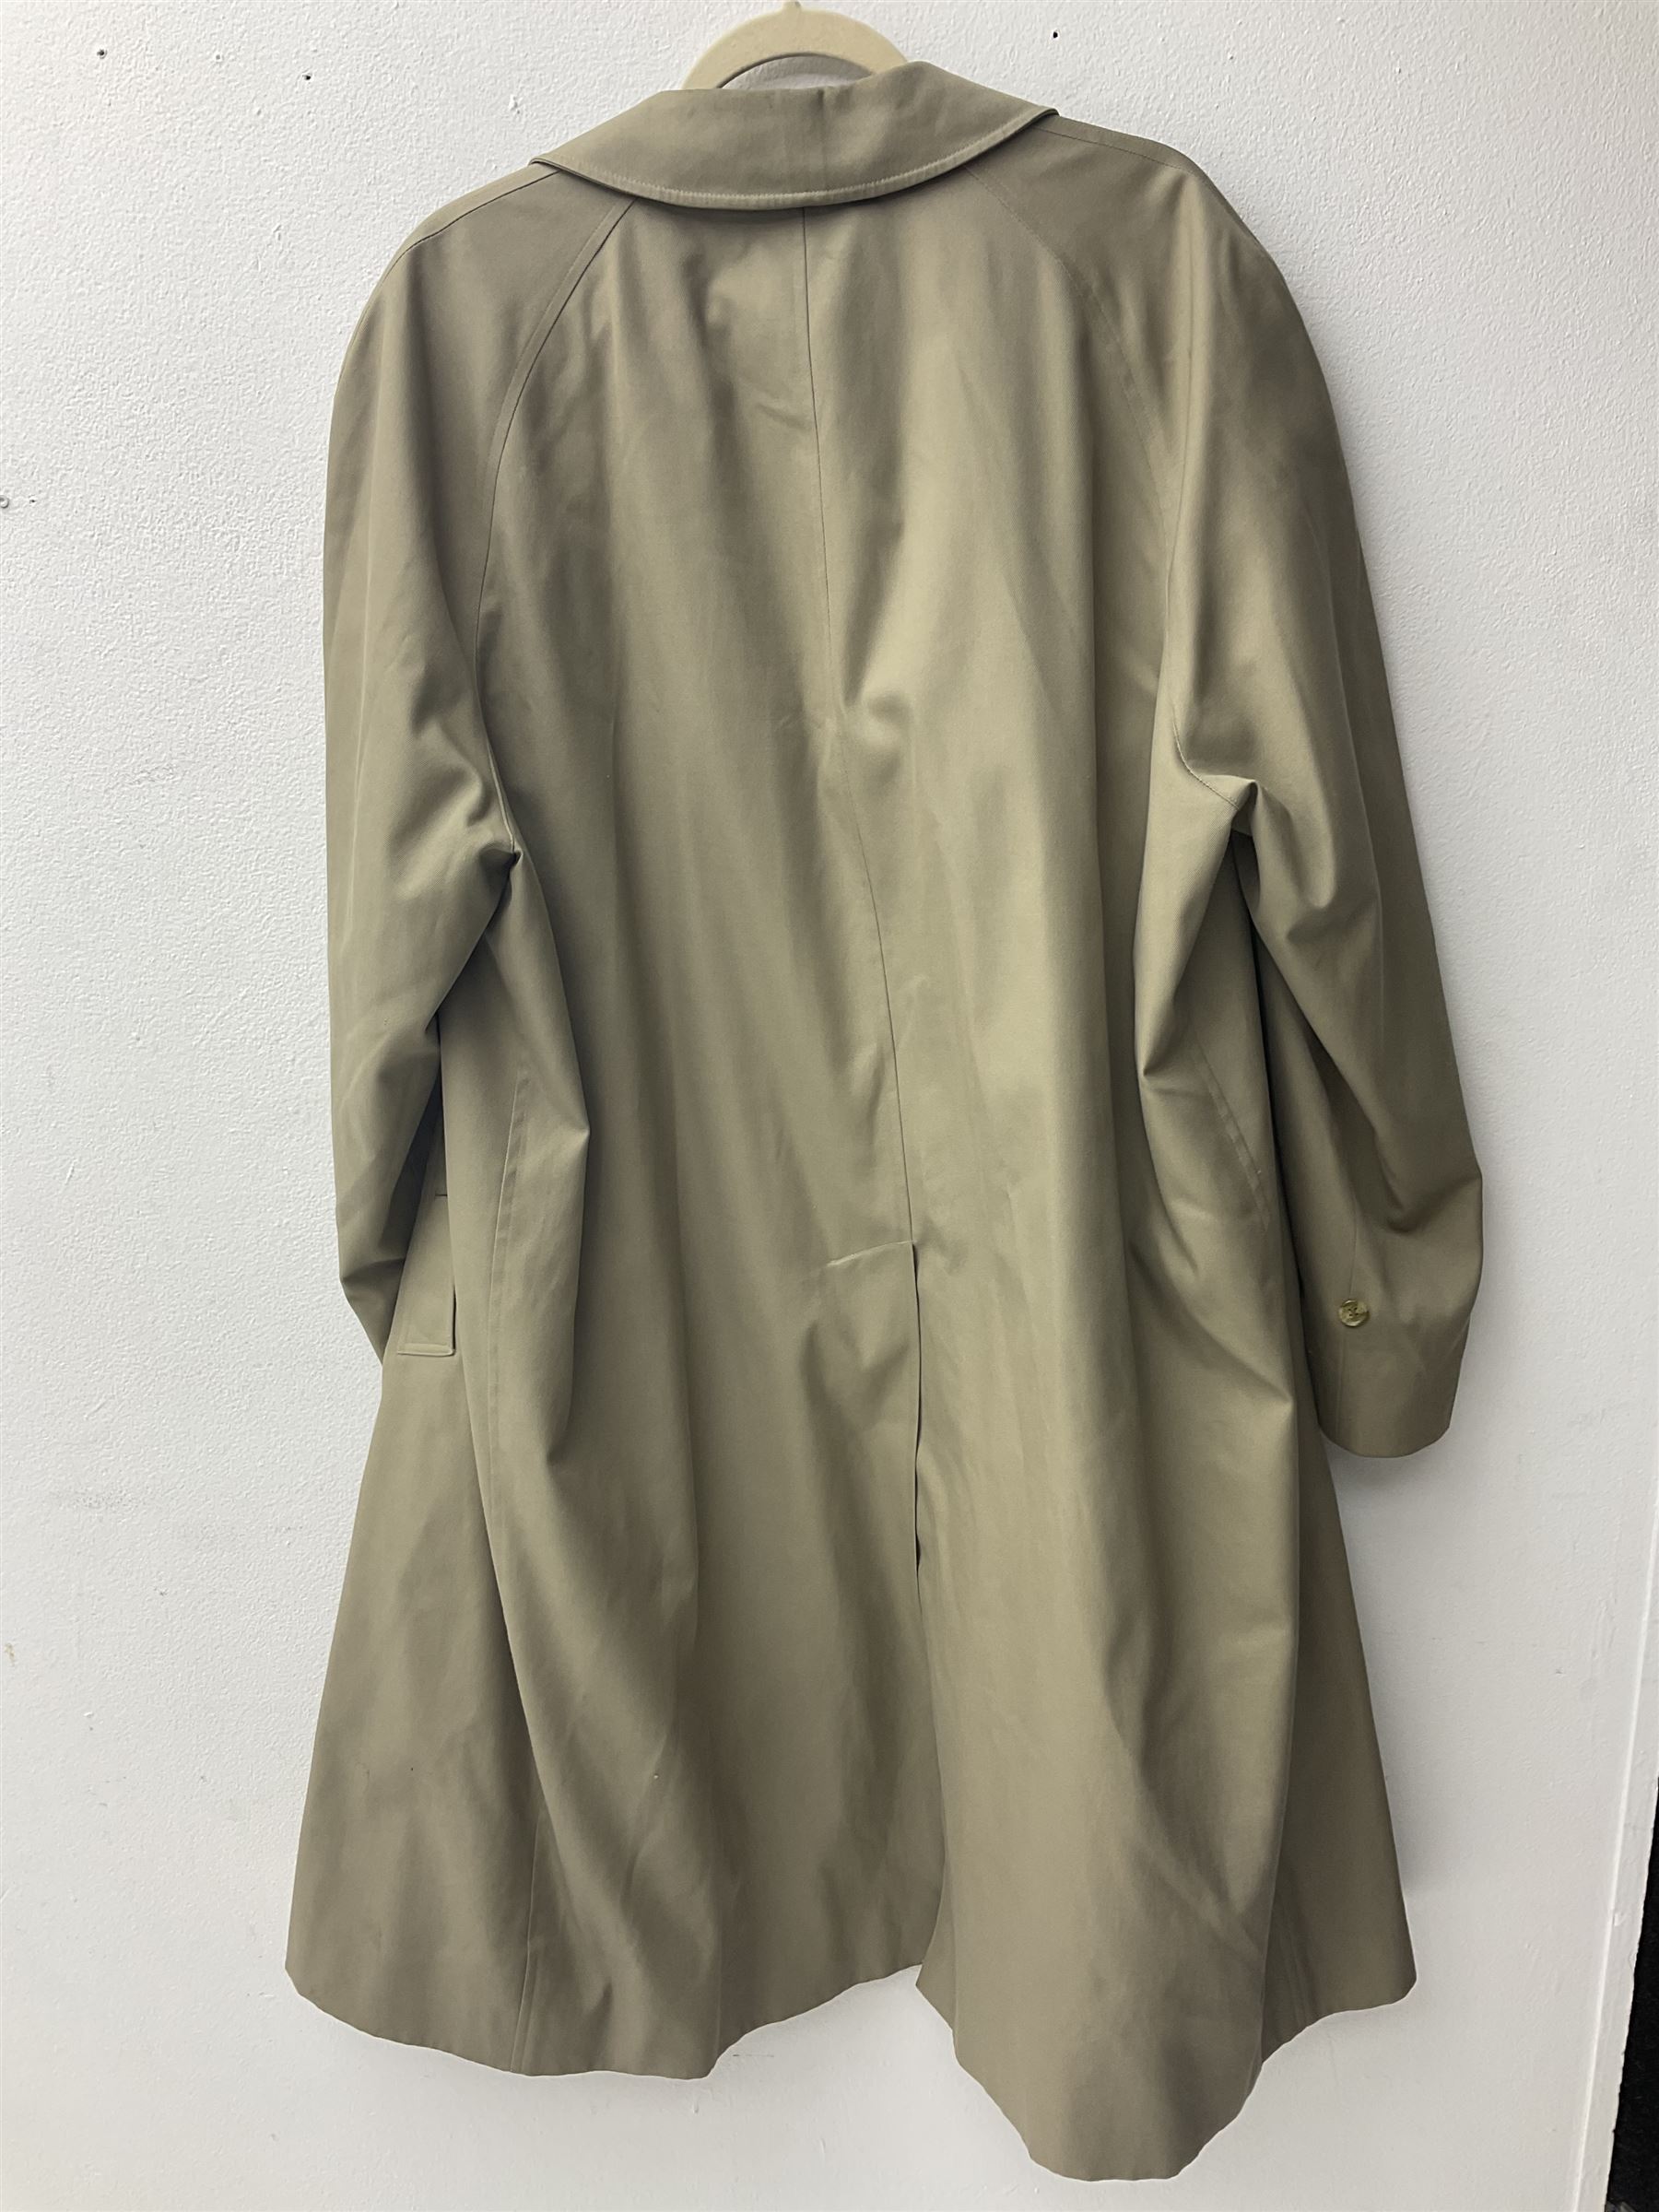 Ladies Burberry double breasted trench coat - Image 25 of 25